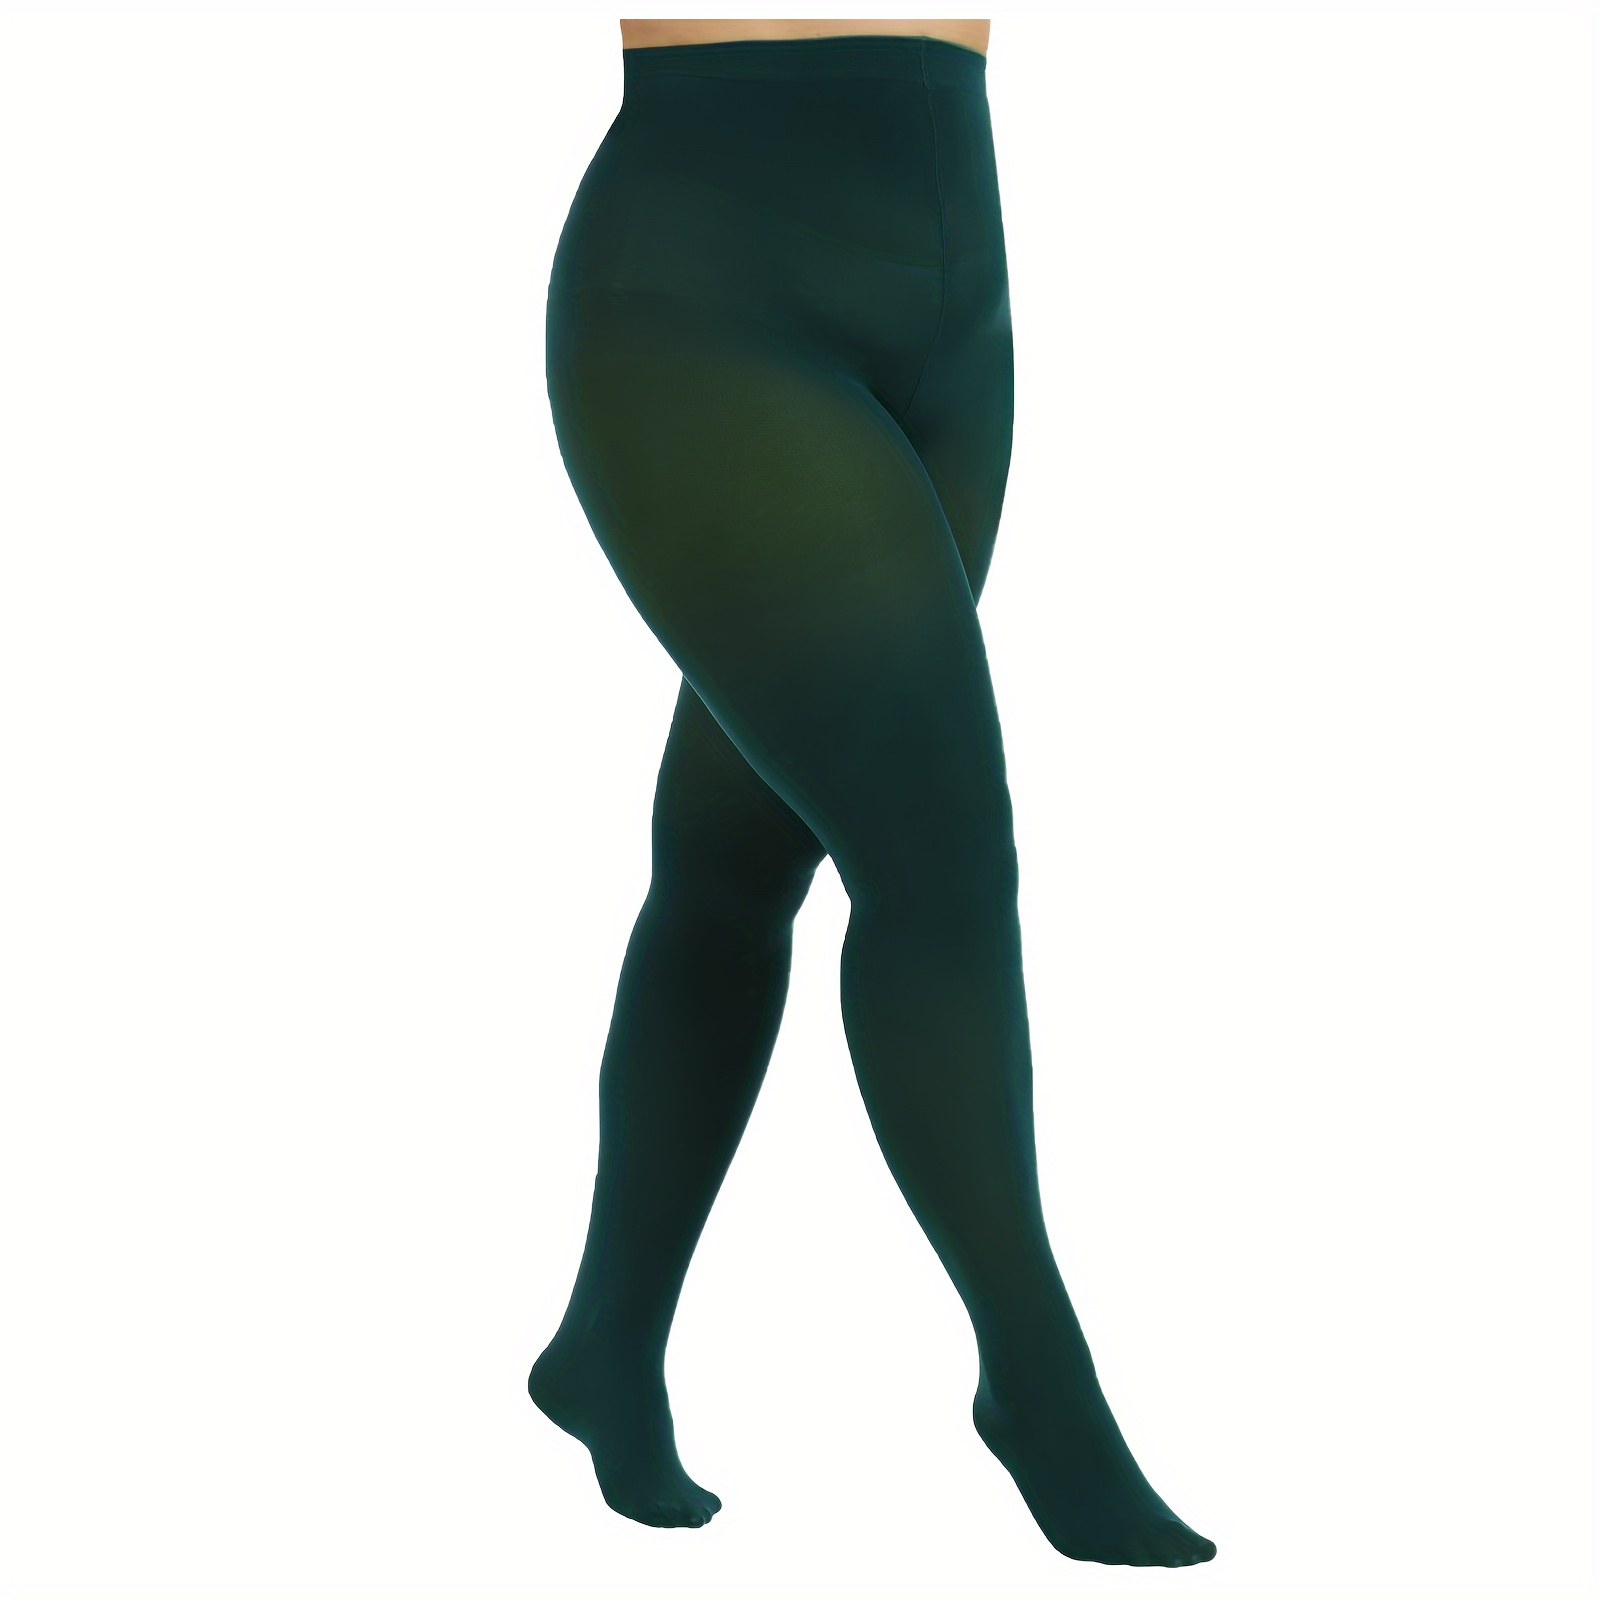 Adult Plus Size Women Opaque Tights Hunter Green